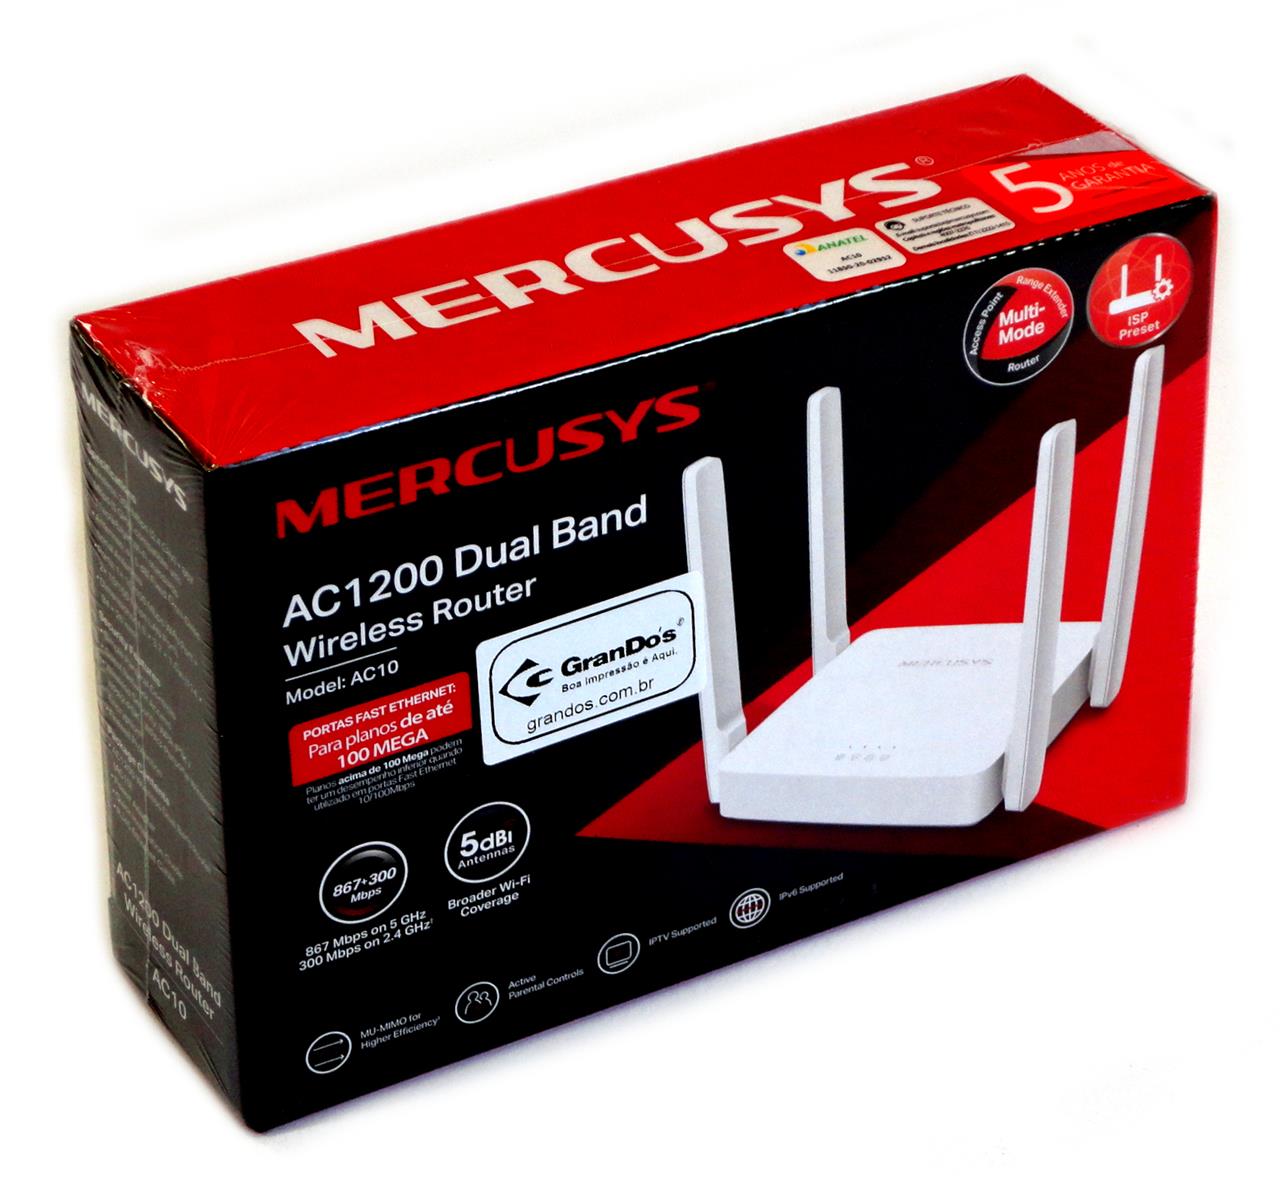 Roteadores e Switch - Roteador 300Mbps + 867Mbps Mercusys Ac1200